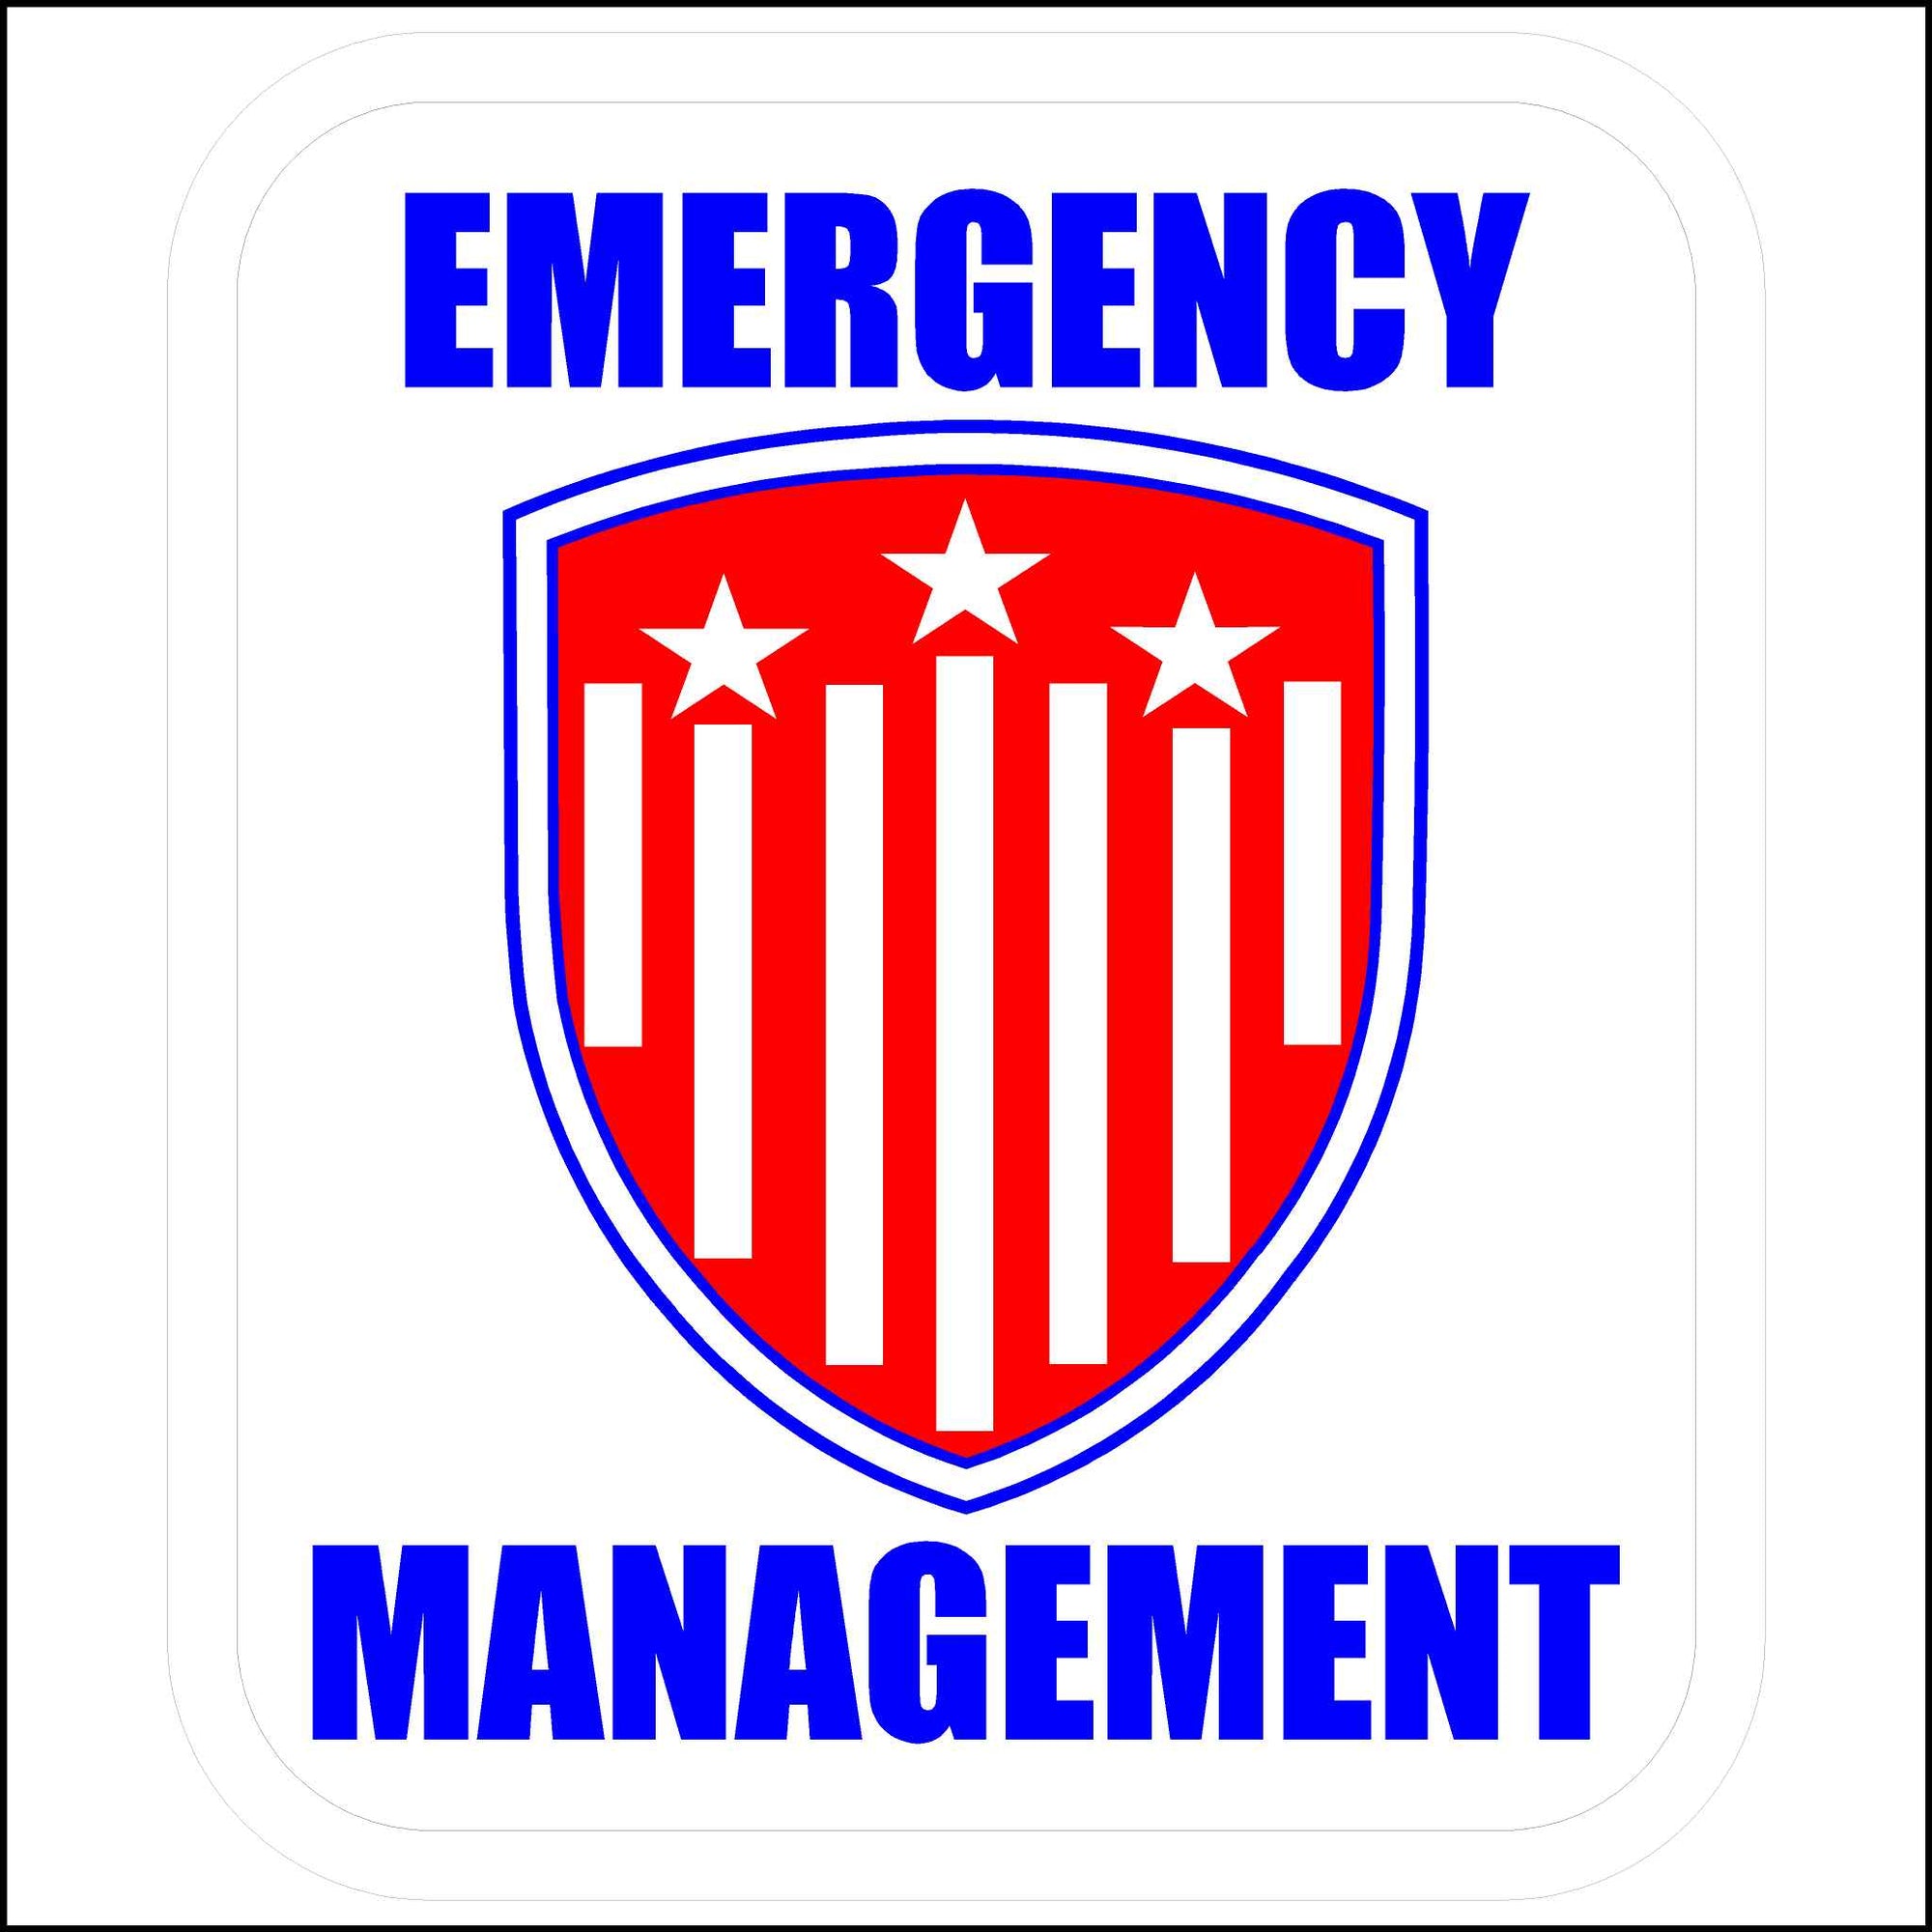 Emergency Management Hard Hat Sticker Printed In Red, White, And Blue.